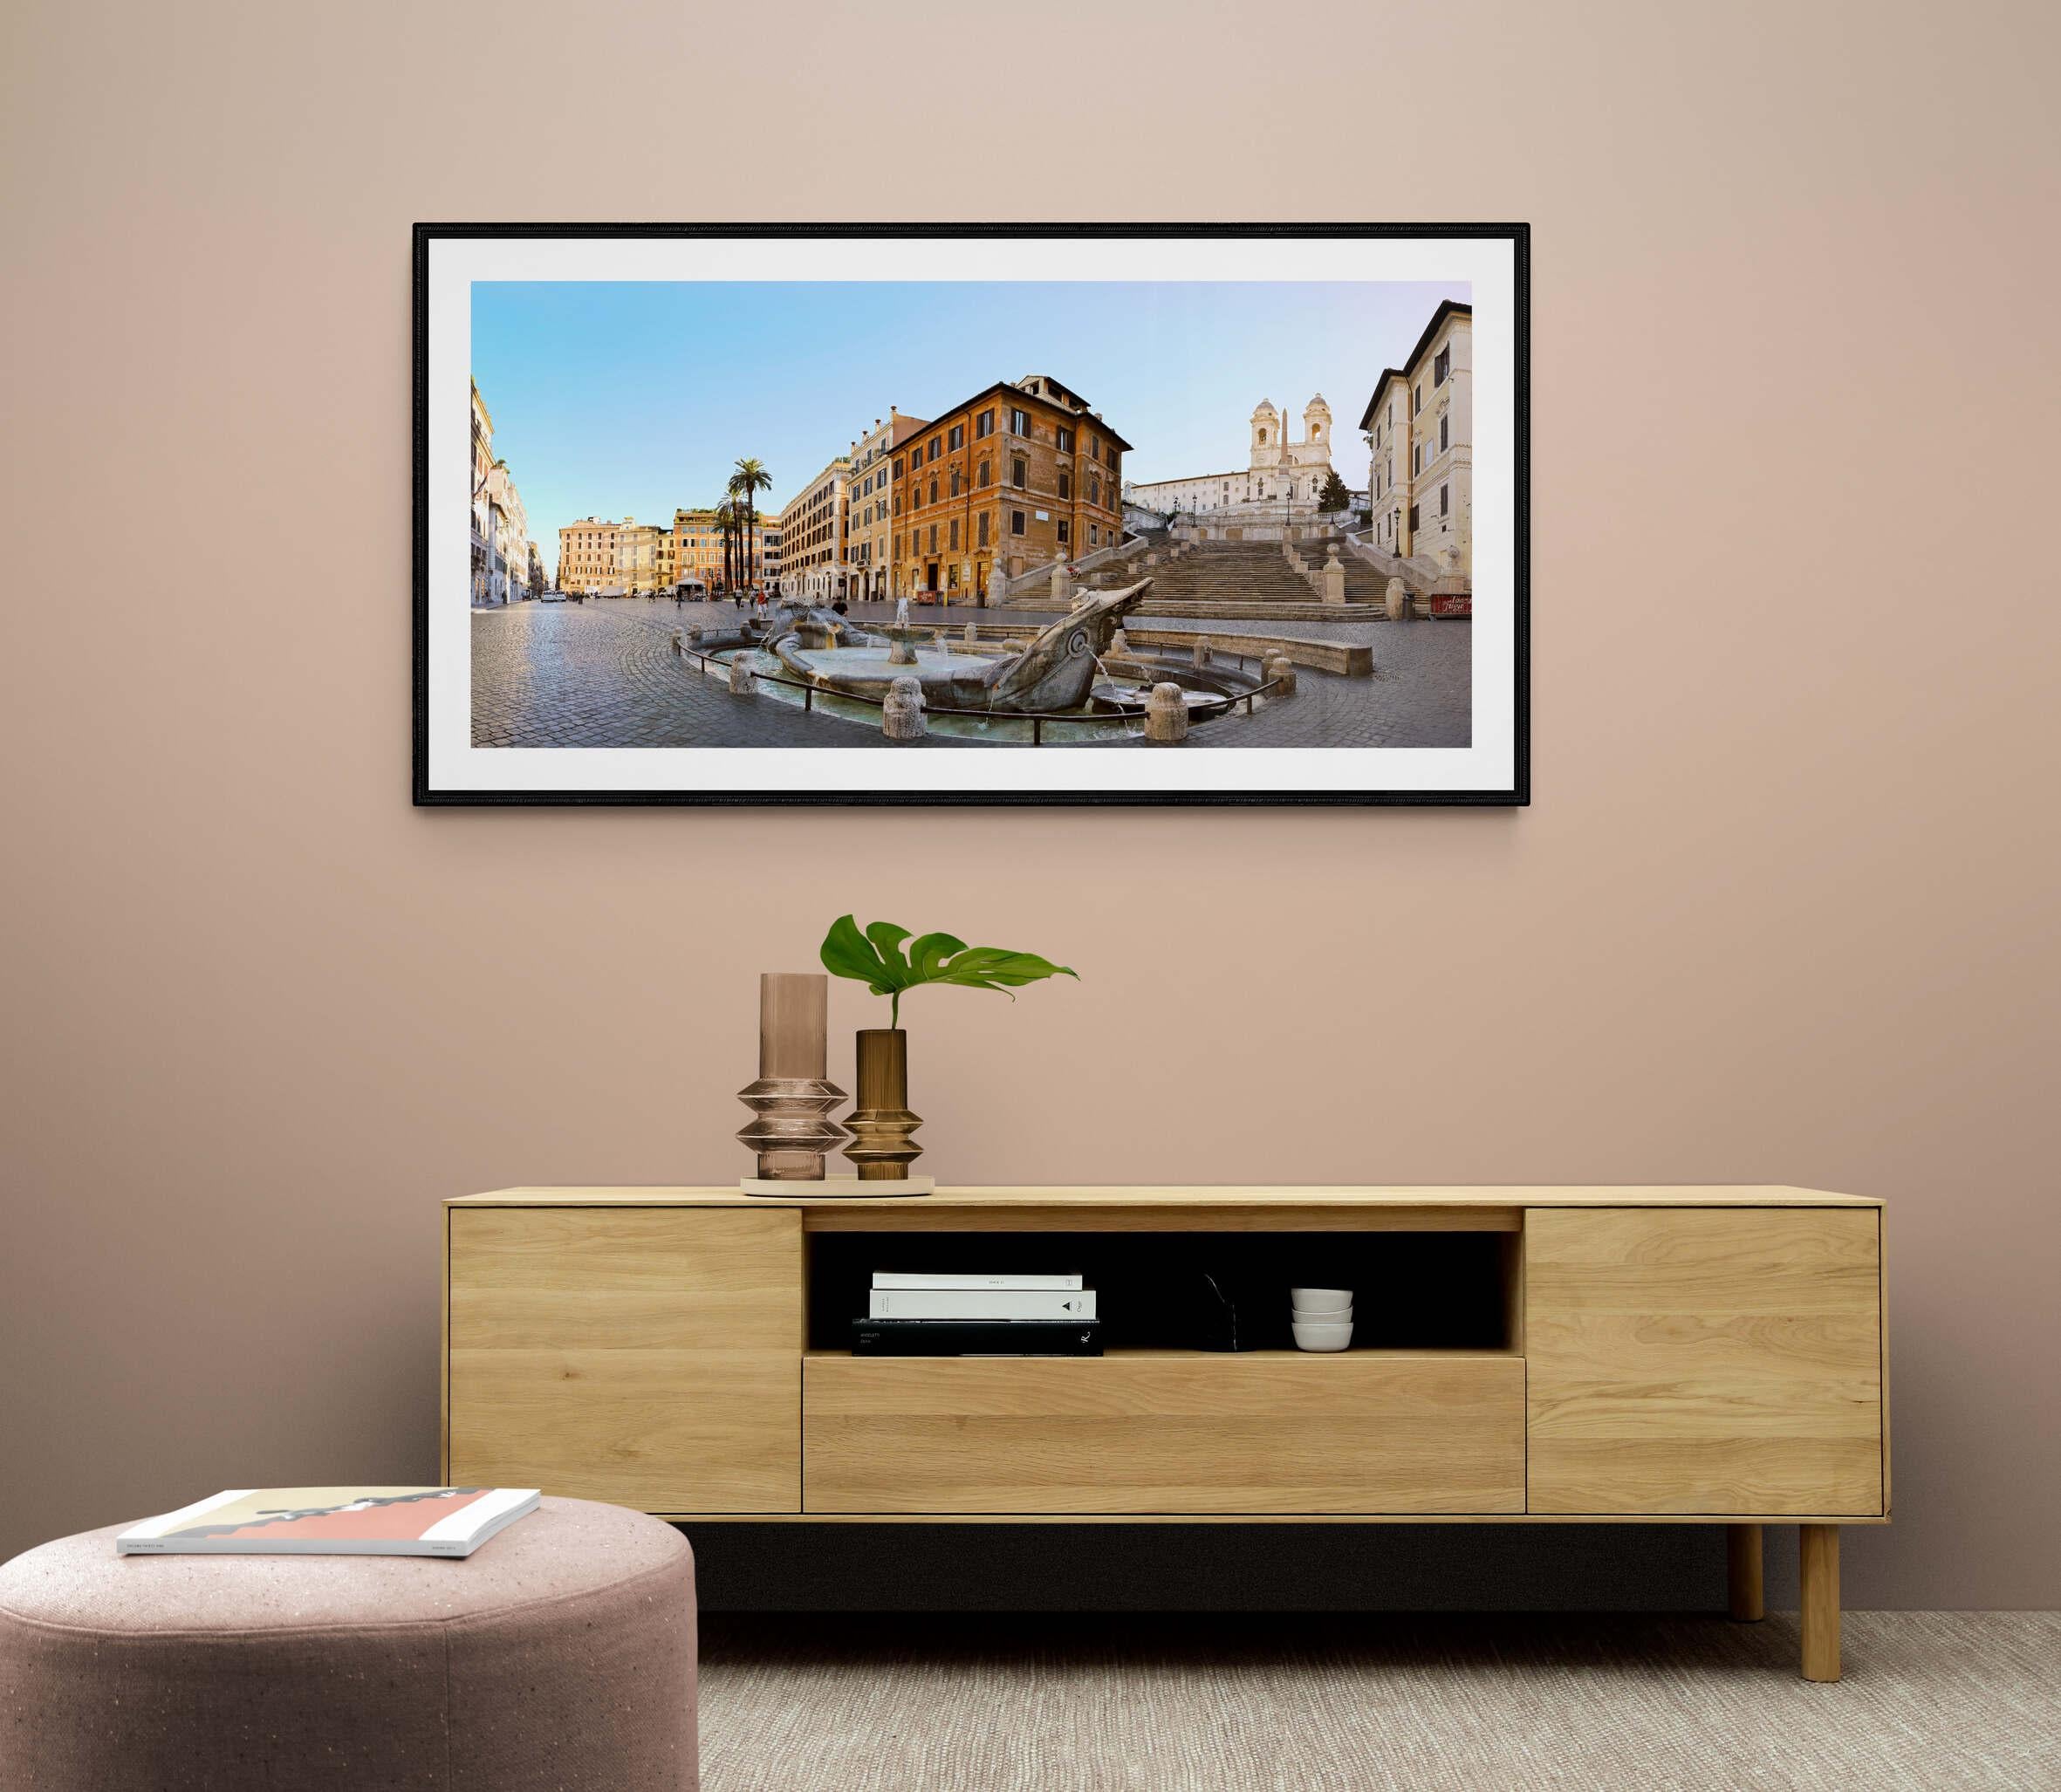 Pigment photographic paper - photography & fine art print © Jean Pierre De Neef 
Artwork sold in perfect condition from a limited edition of 12 ex- Composition from an assembly of 16 shots digitaly edited and made in 2012
The Spanish Steps (piazza